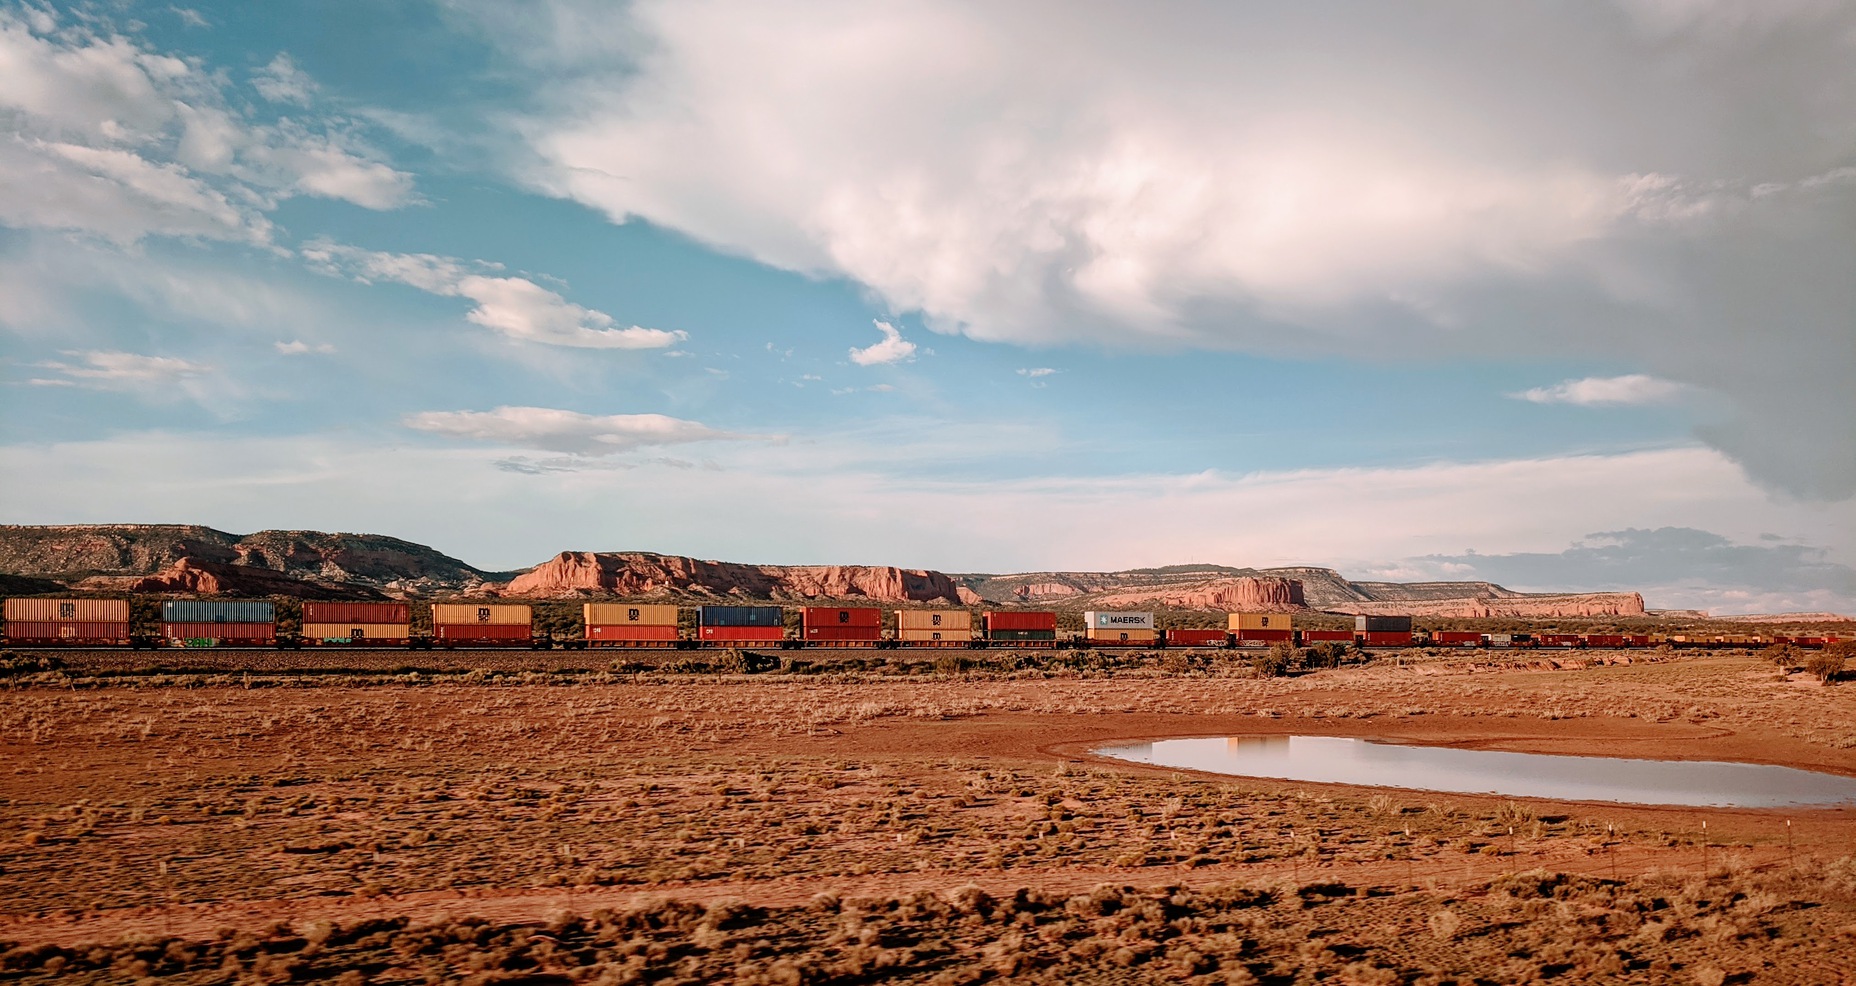 A freight train passes through western New Mexico.